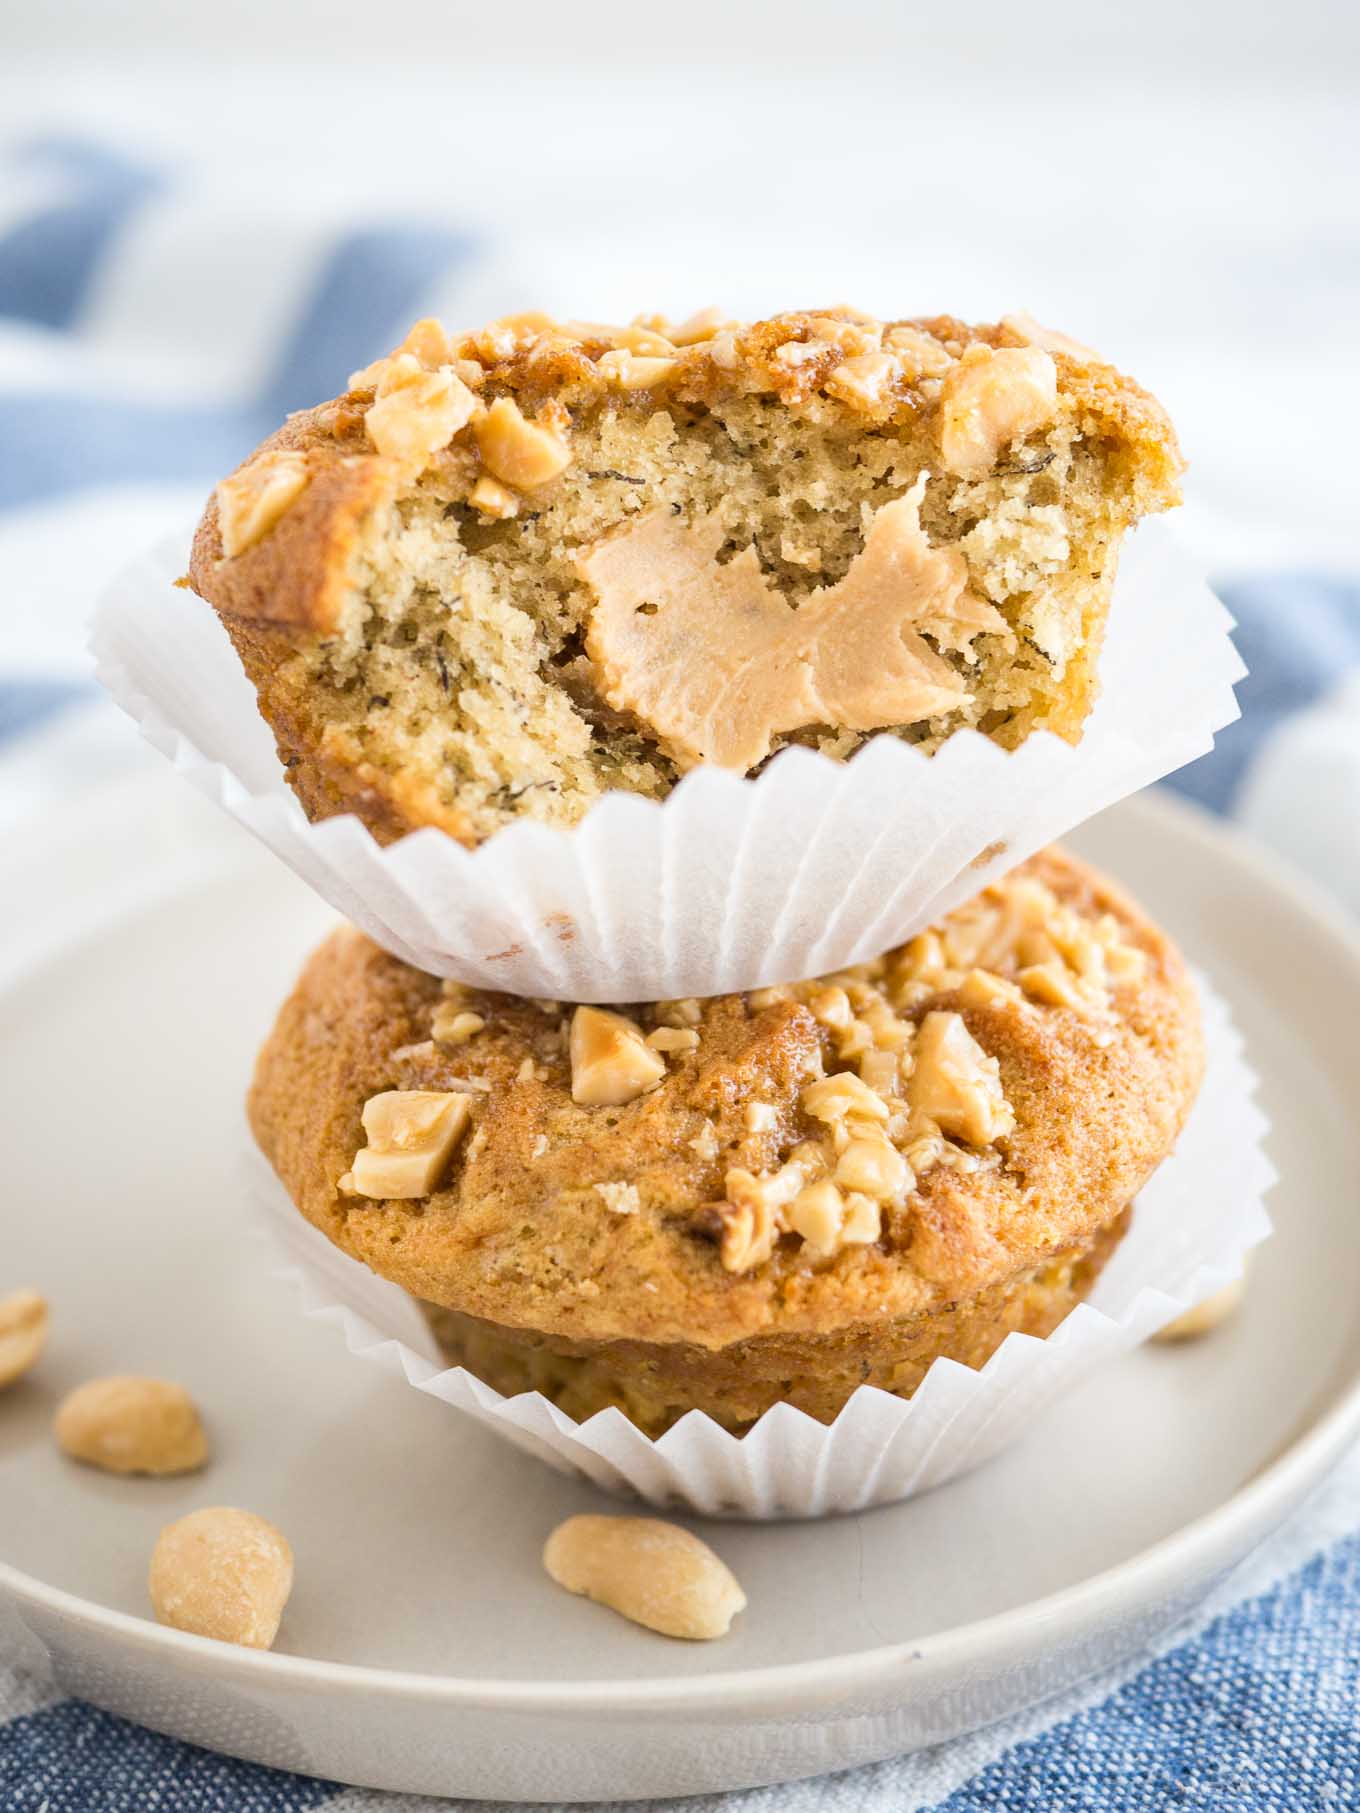 2 peanut butter banana muffins, topped with peanuts with their liners opened stacked on top of each other on a grey plate on a white and blue dishtowel. A big bite has been taken out of the top muffin revealing a peanut butter core.